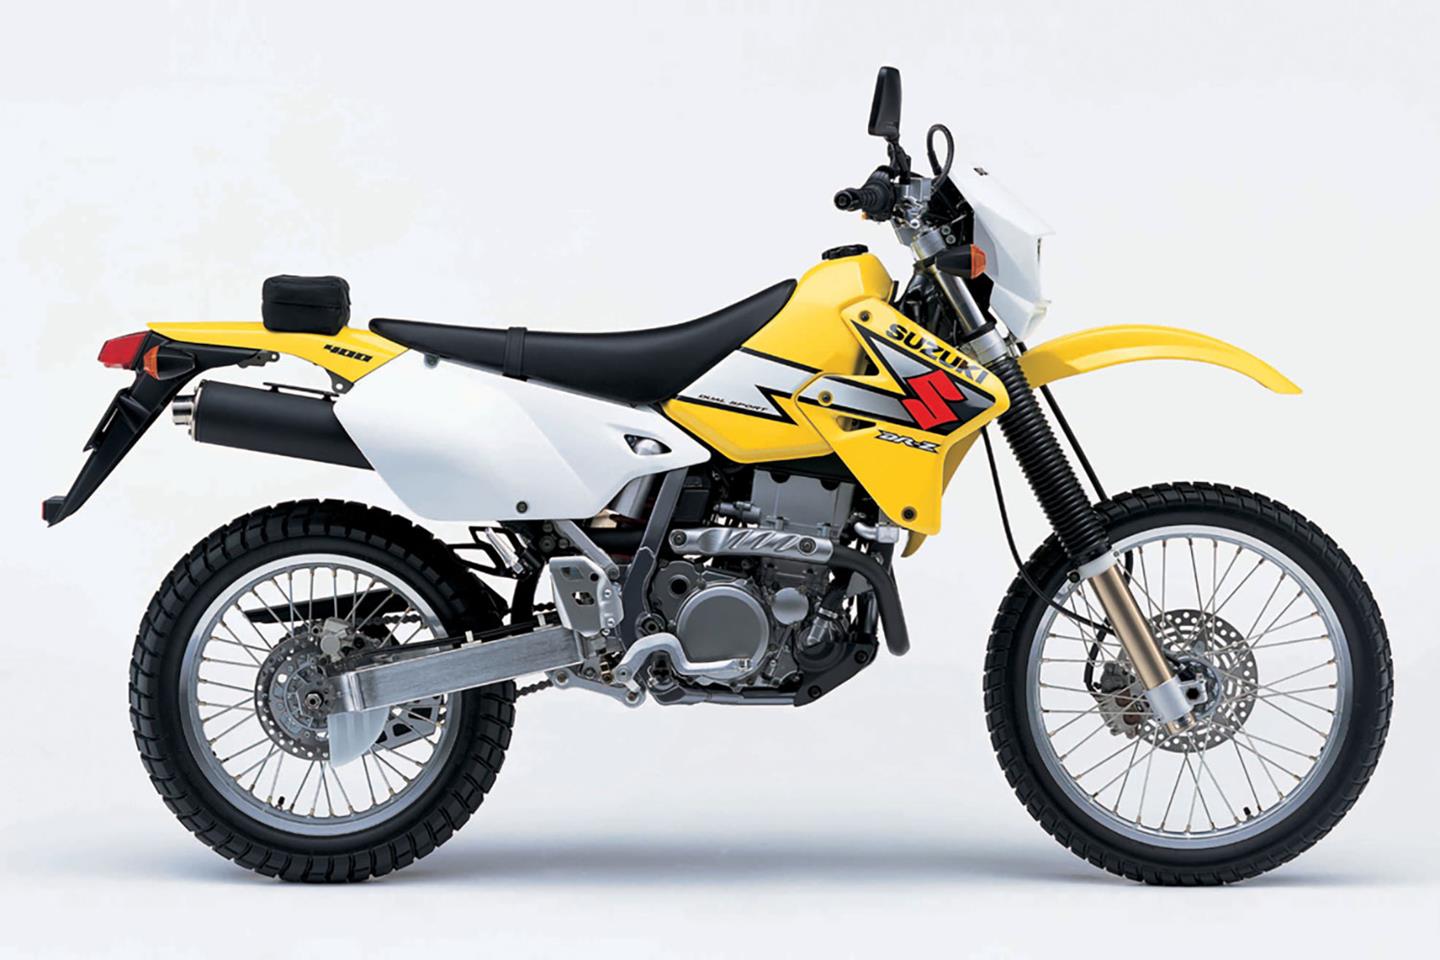 Suzuki DRZ400 S (2001-2009) review & used buying guide